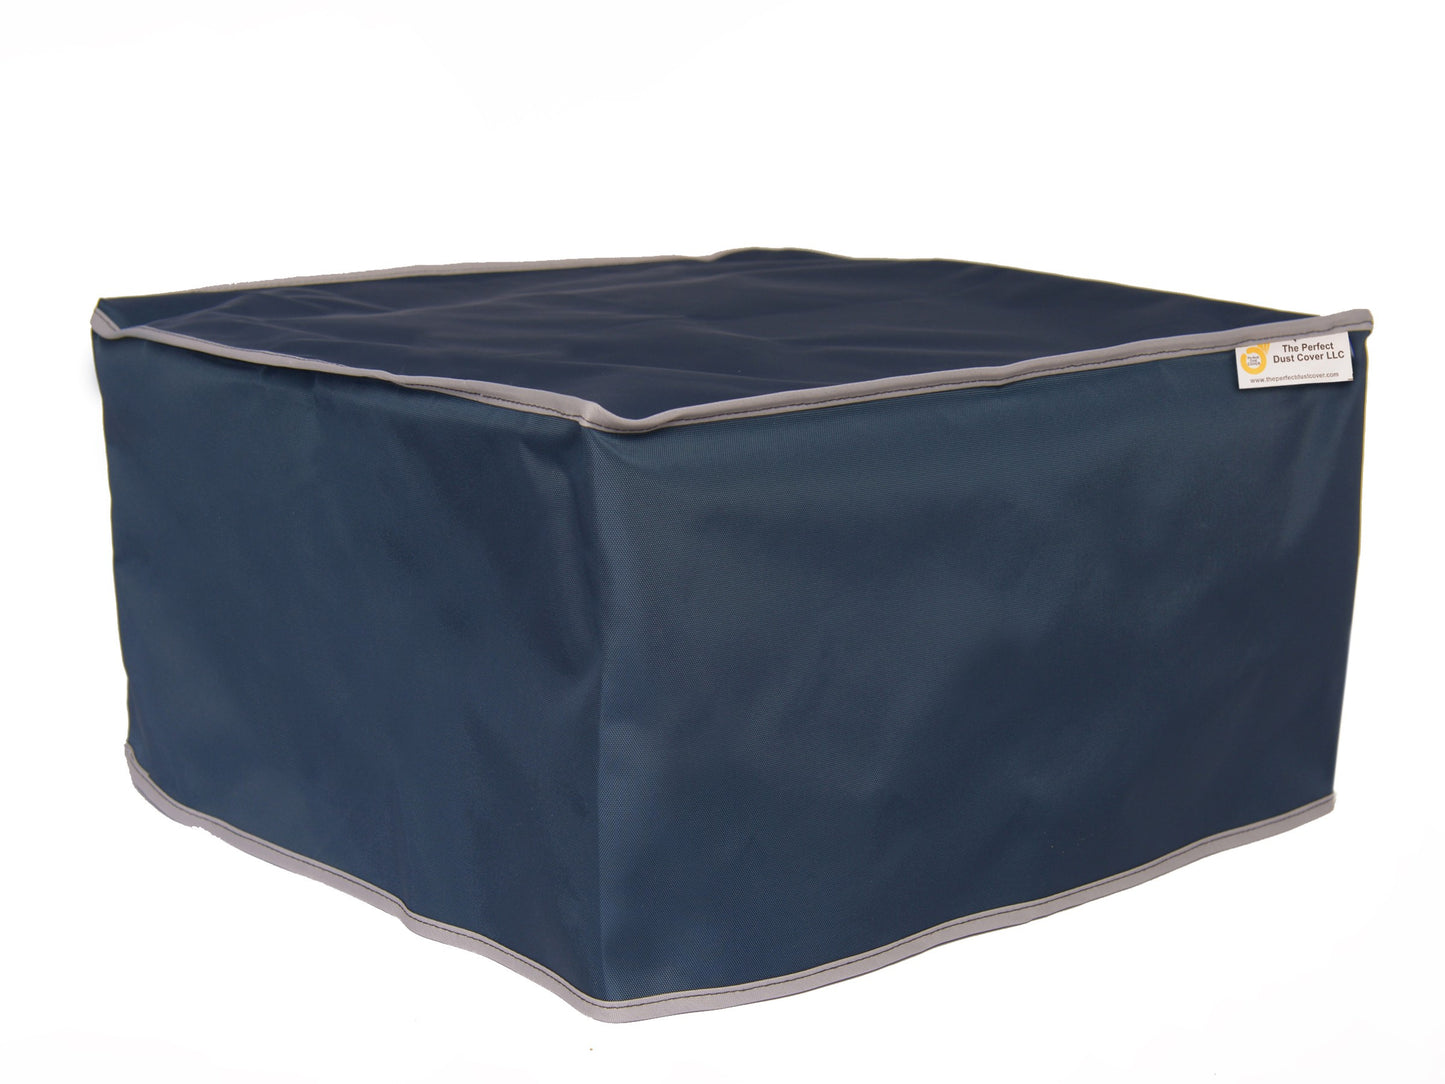 The Perfect Dust Cover, Navy Blue Nylon SHORT Cover for HP Latex 330 64-in Wide Format Inkjet Printer, Anti Static Waterproof Cover, Dimensions 101''W x 33''D x 20''H by The Perfect Dust Cover LLC